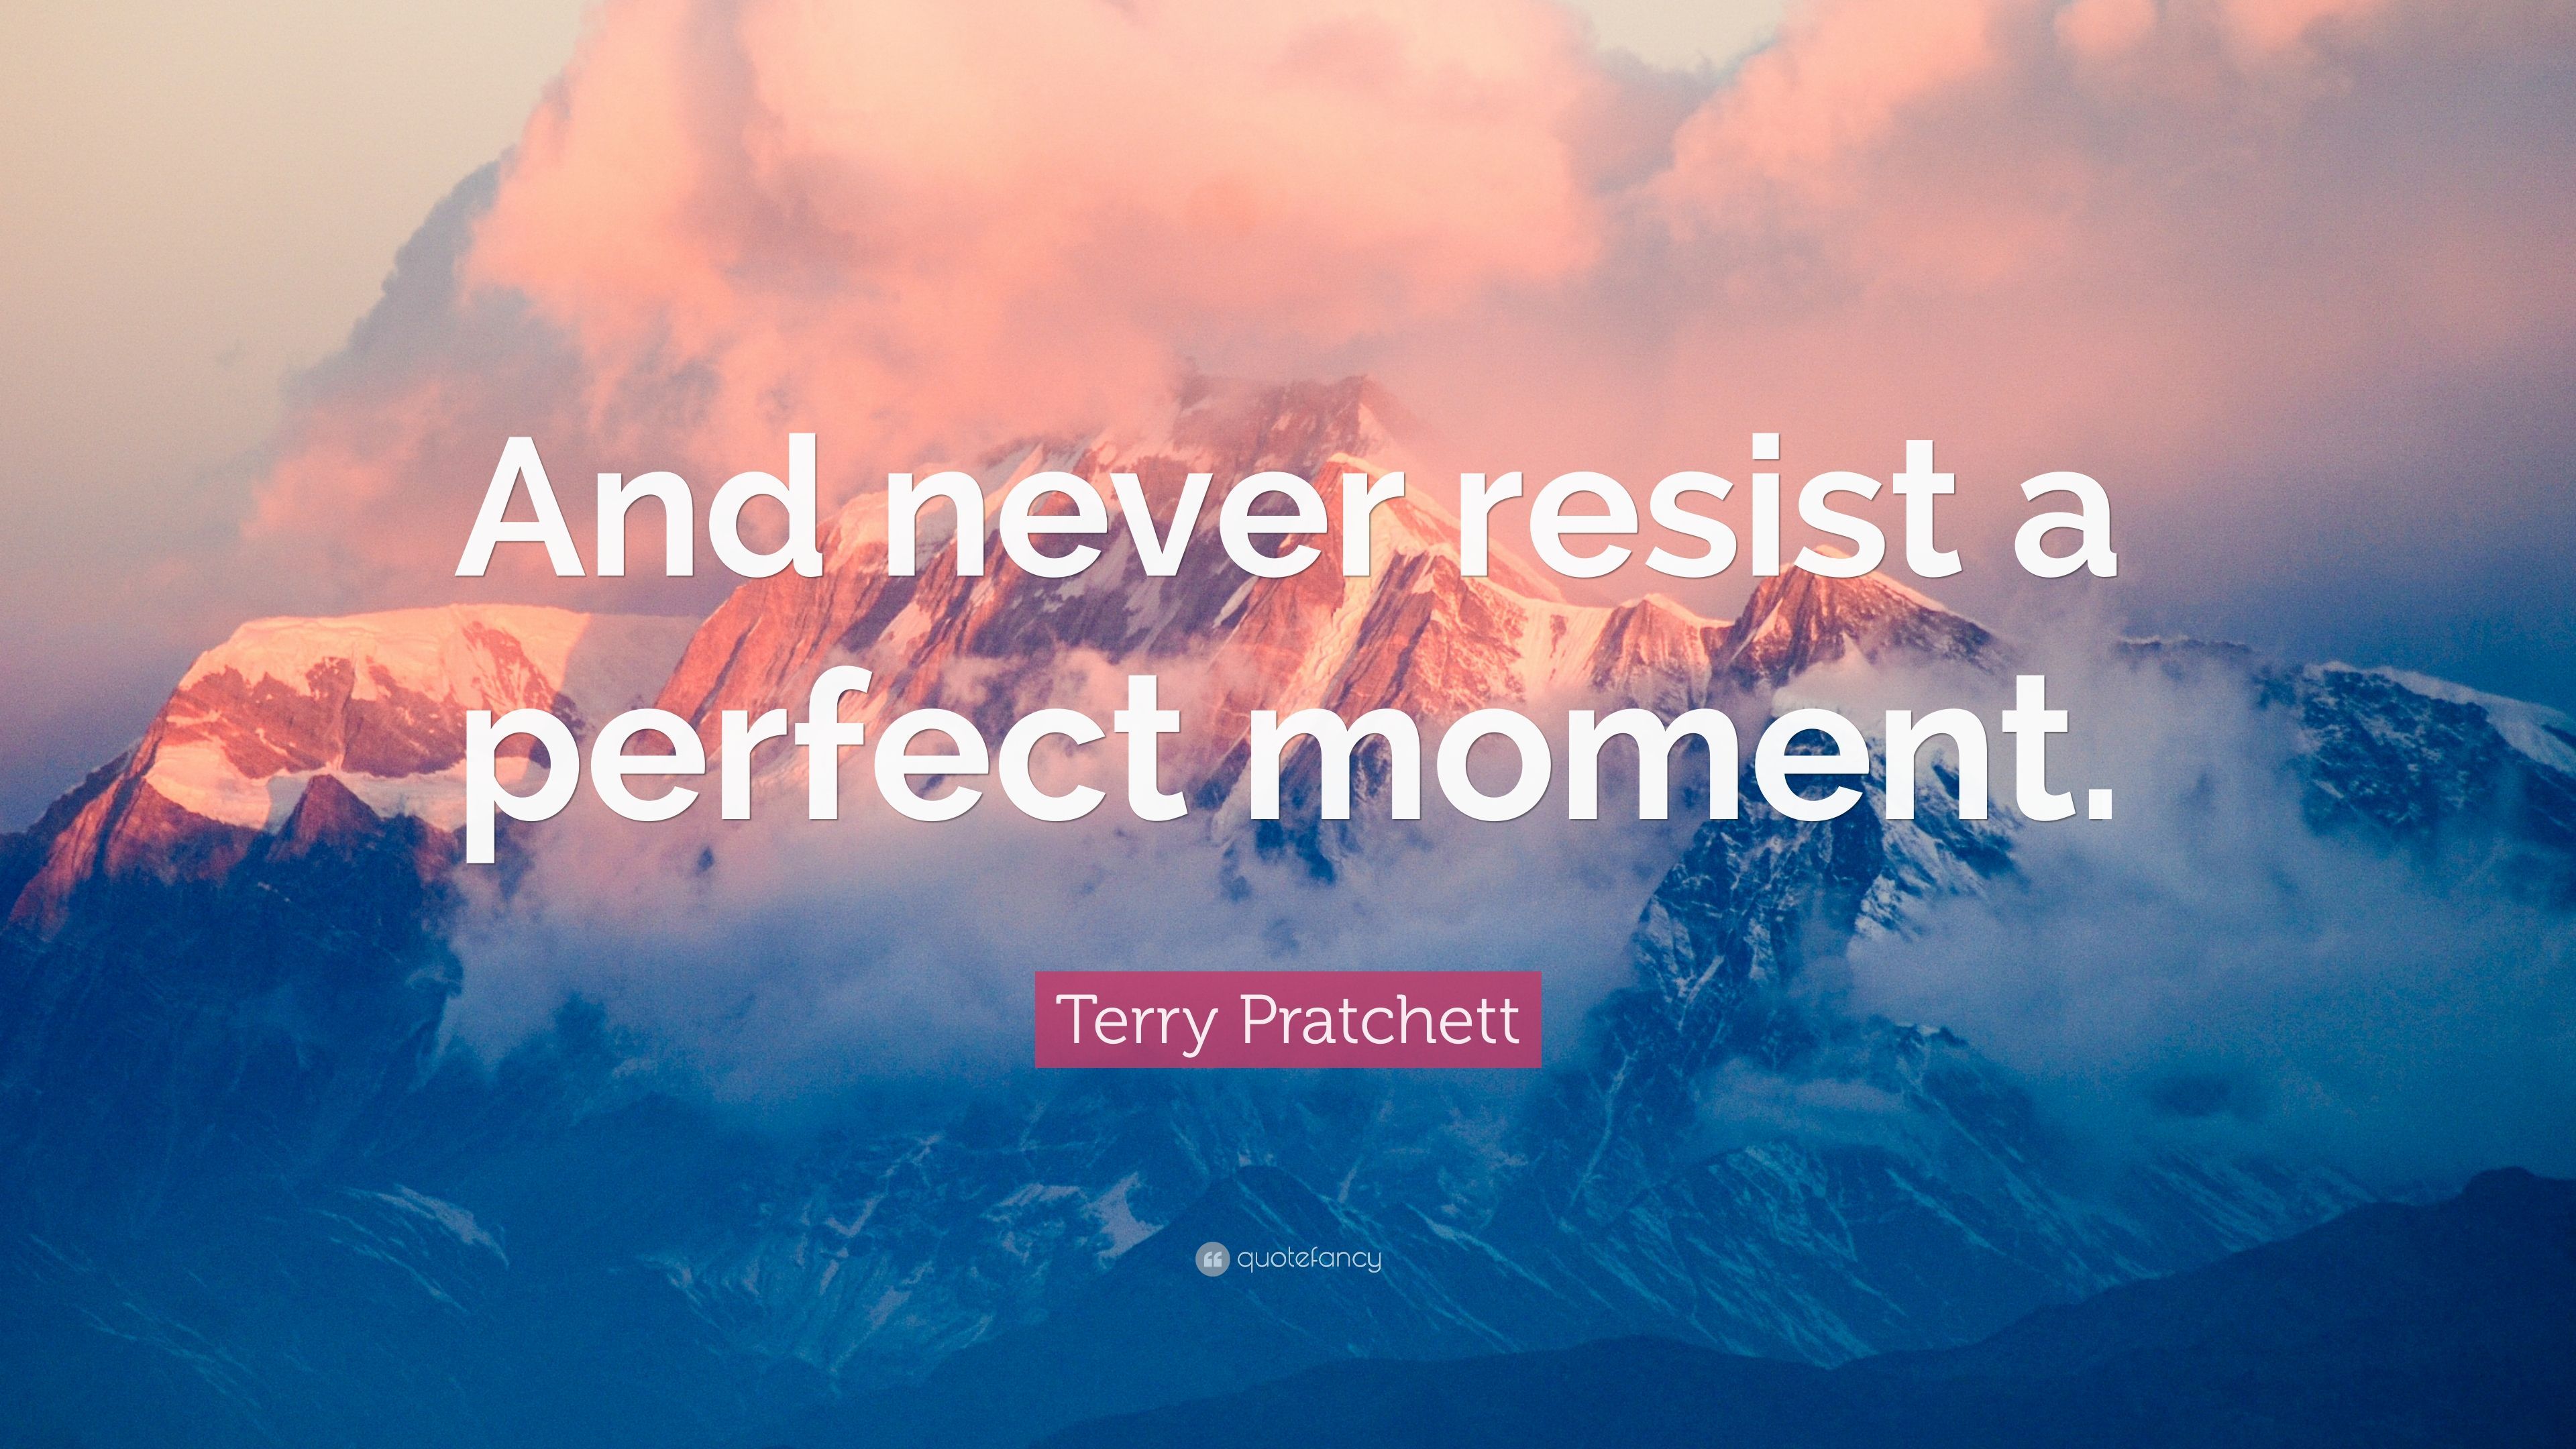 Terry Pratchett Quote: “And never resist a perfect moment.” (7 wallpaper)